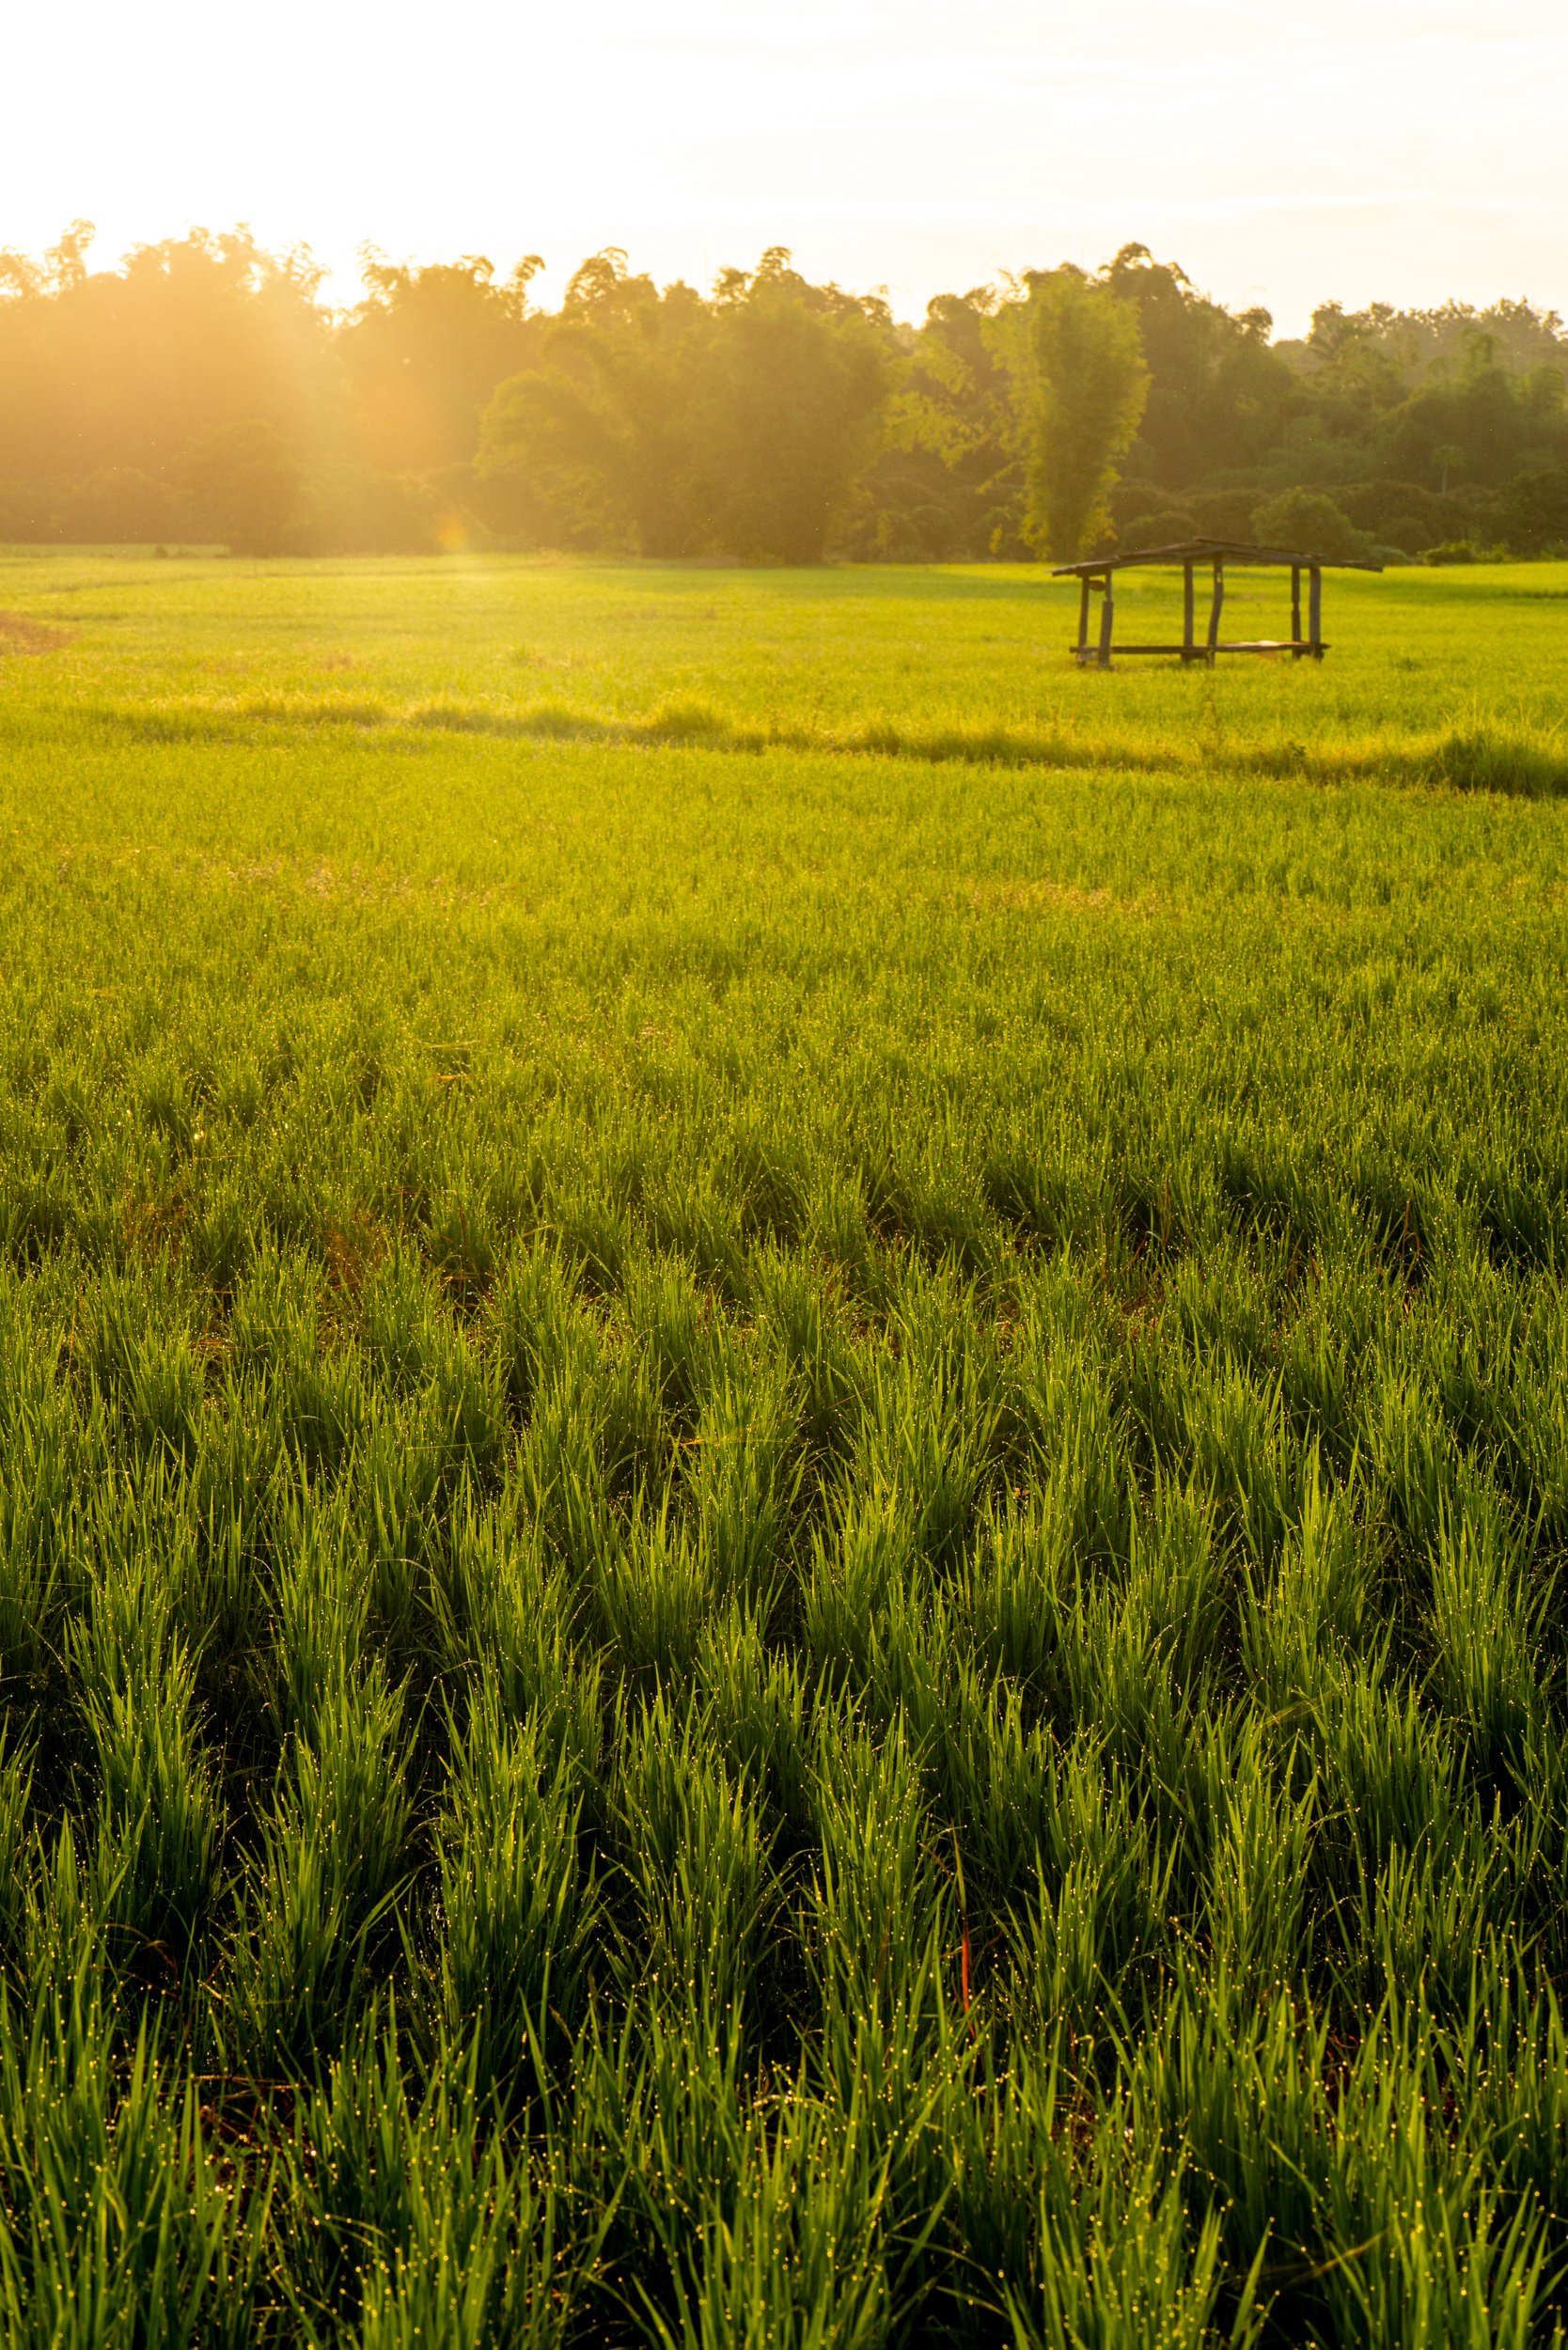 Golden hour in the rice fields with lovely warm light for photography